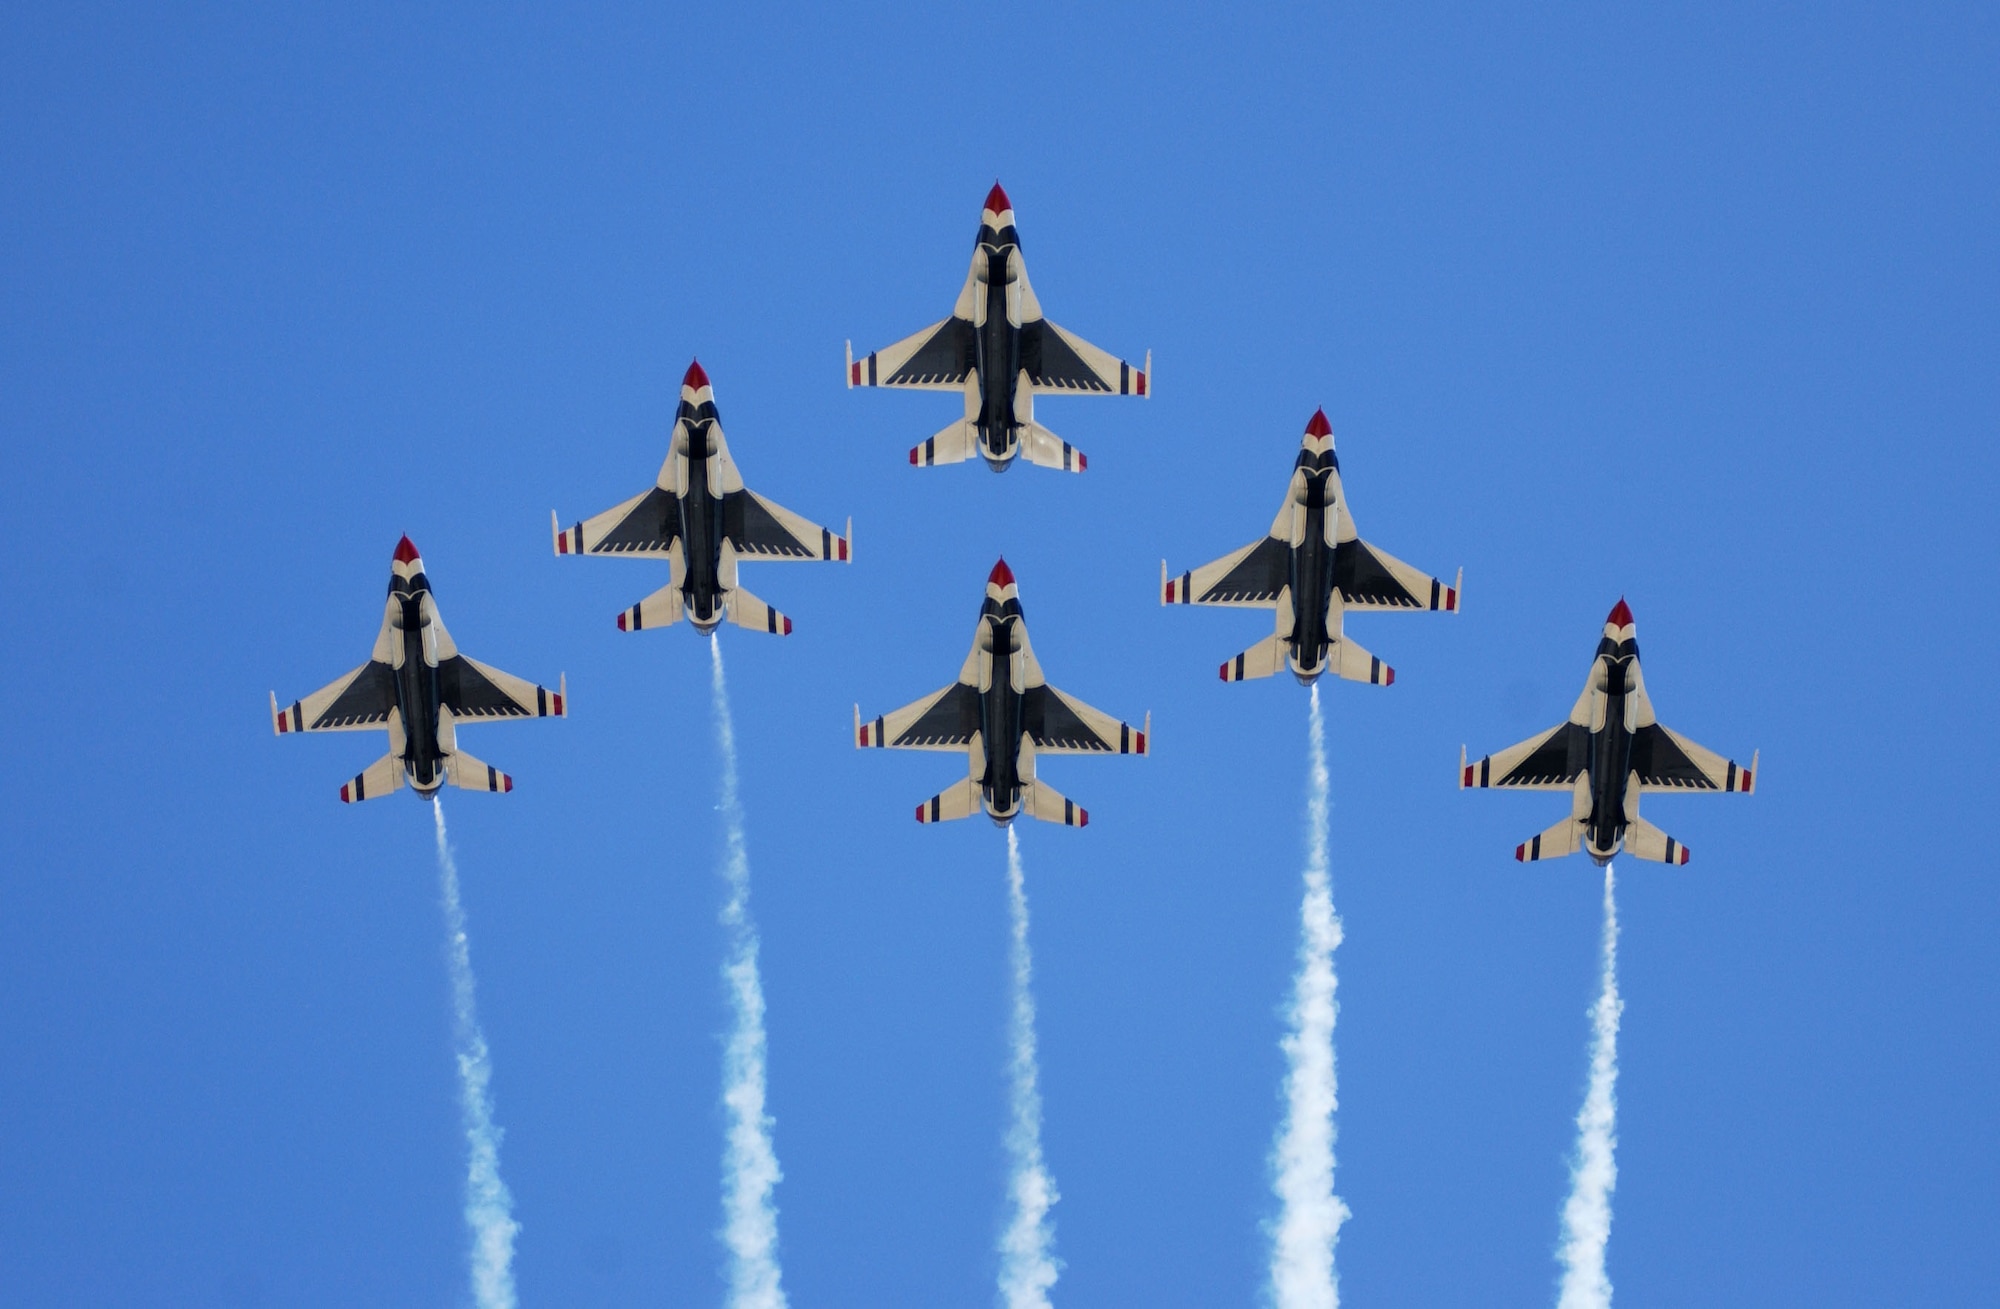 SIOUX FALLS S.D. -- The U.S. Air Force Thunderbirds perform a 6-ship formation fly over during a 2003 airshow.  The team performs precision aerial maneuvers to exhibit the capabilities of modern high-performance aircraft to audiences throughout the world.  (U.S. Air Force photo by Senior Airman Michael Frye)